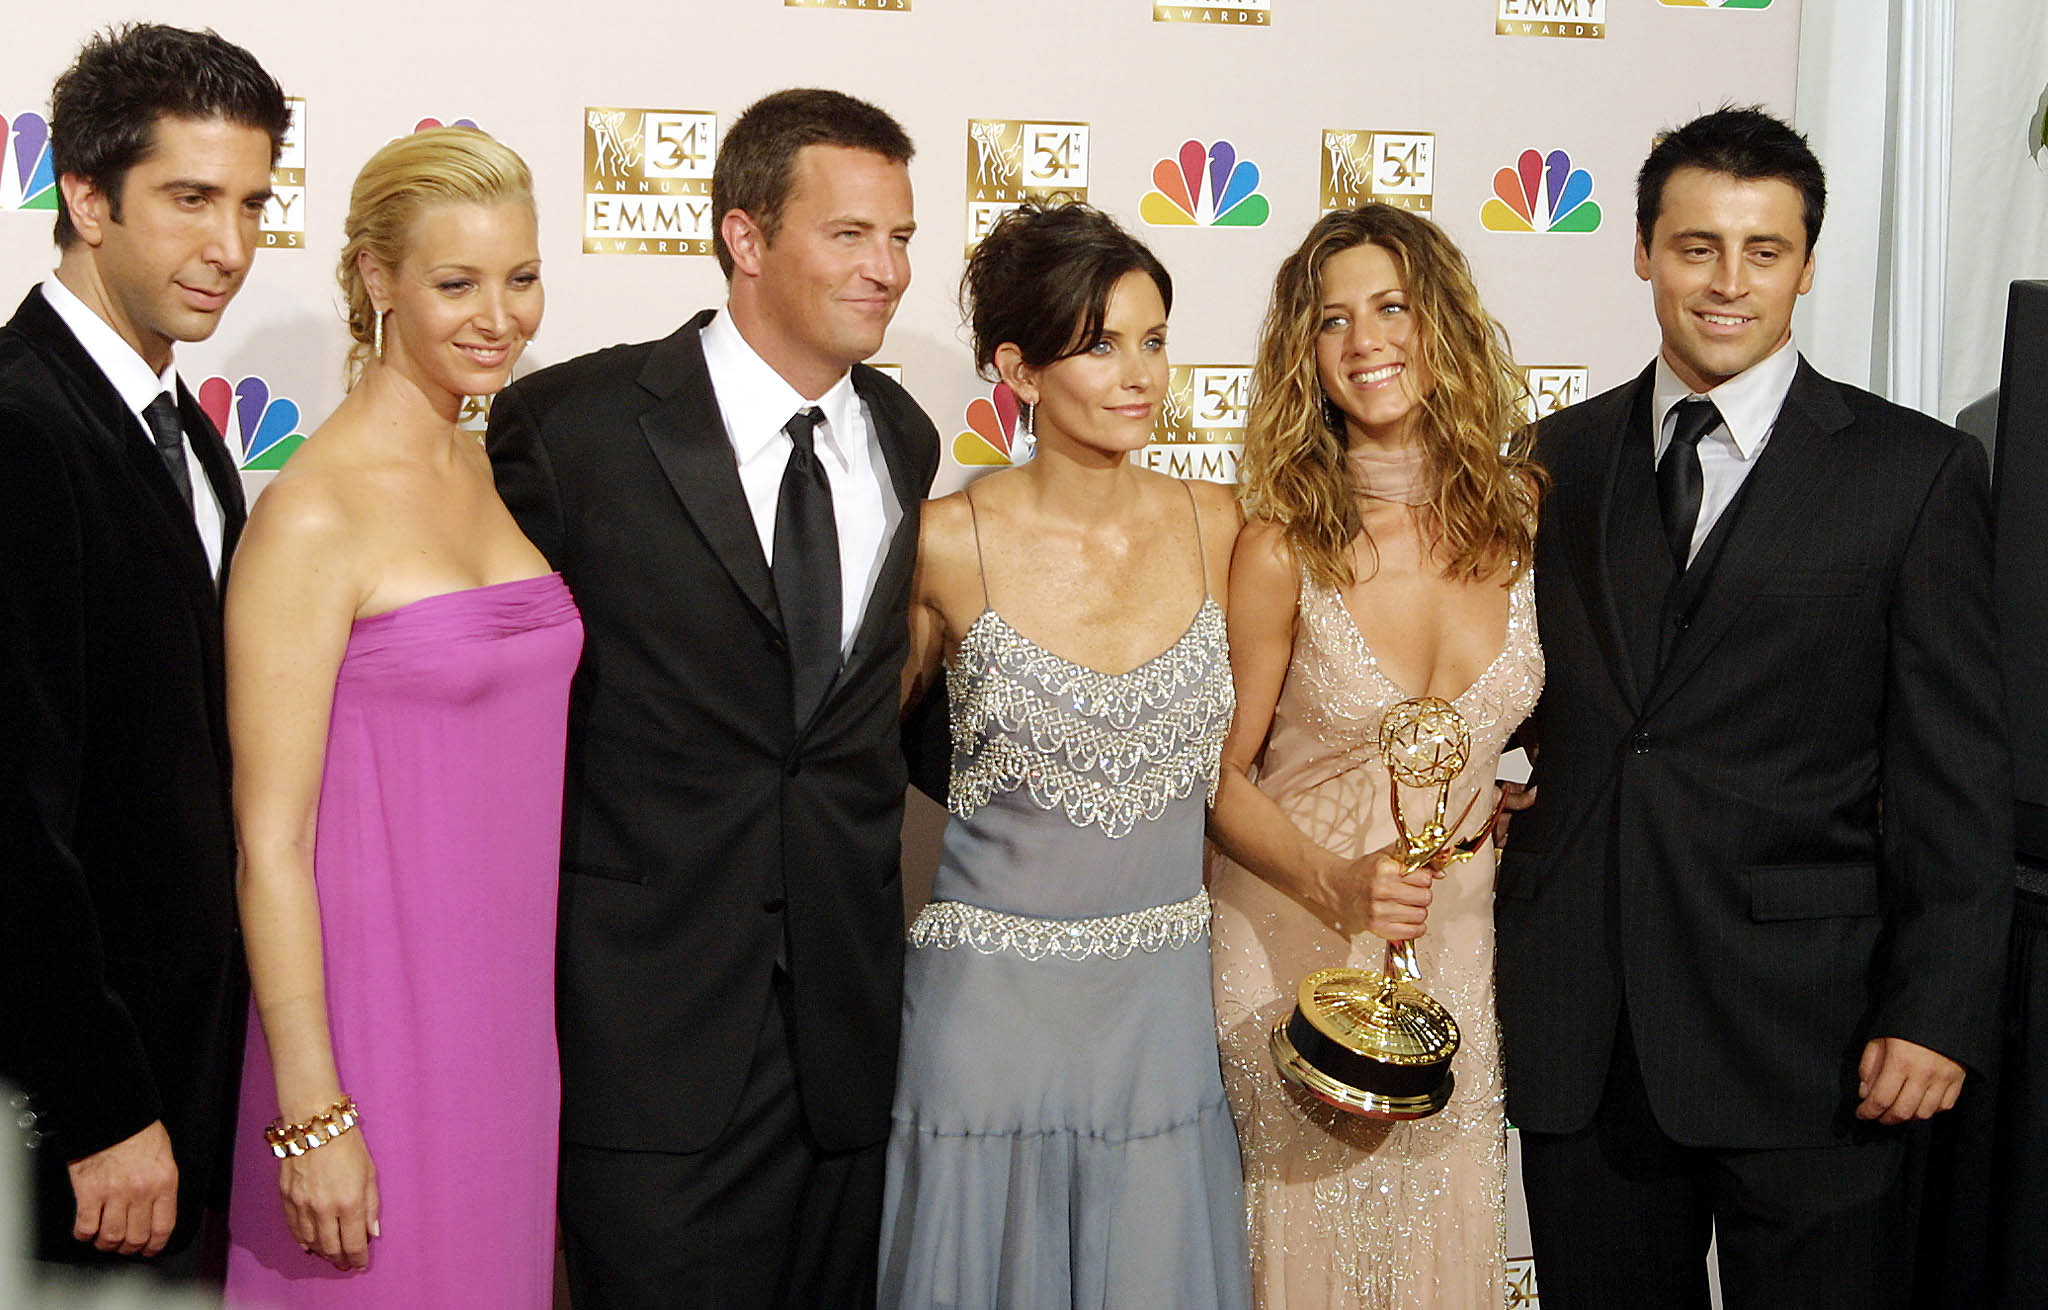 ‘Friends: The Reunion’ out on May 27 in India. Details here